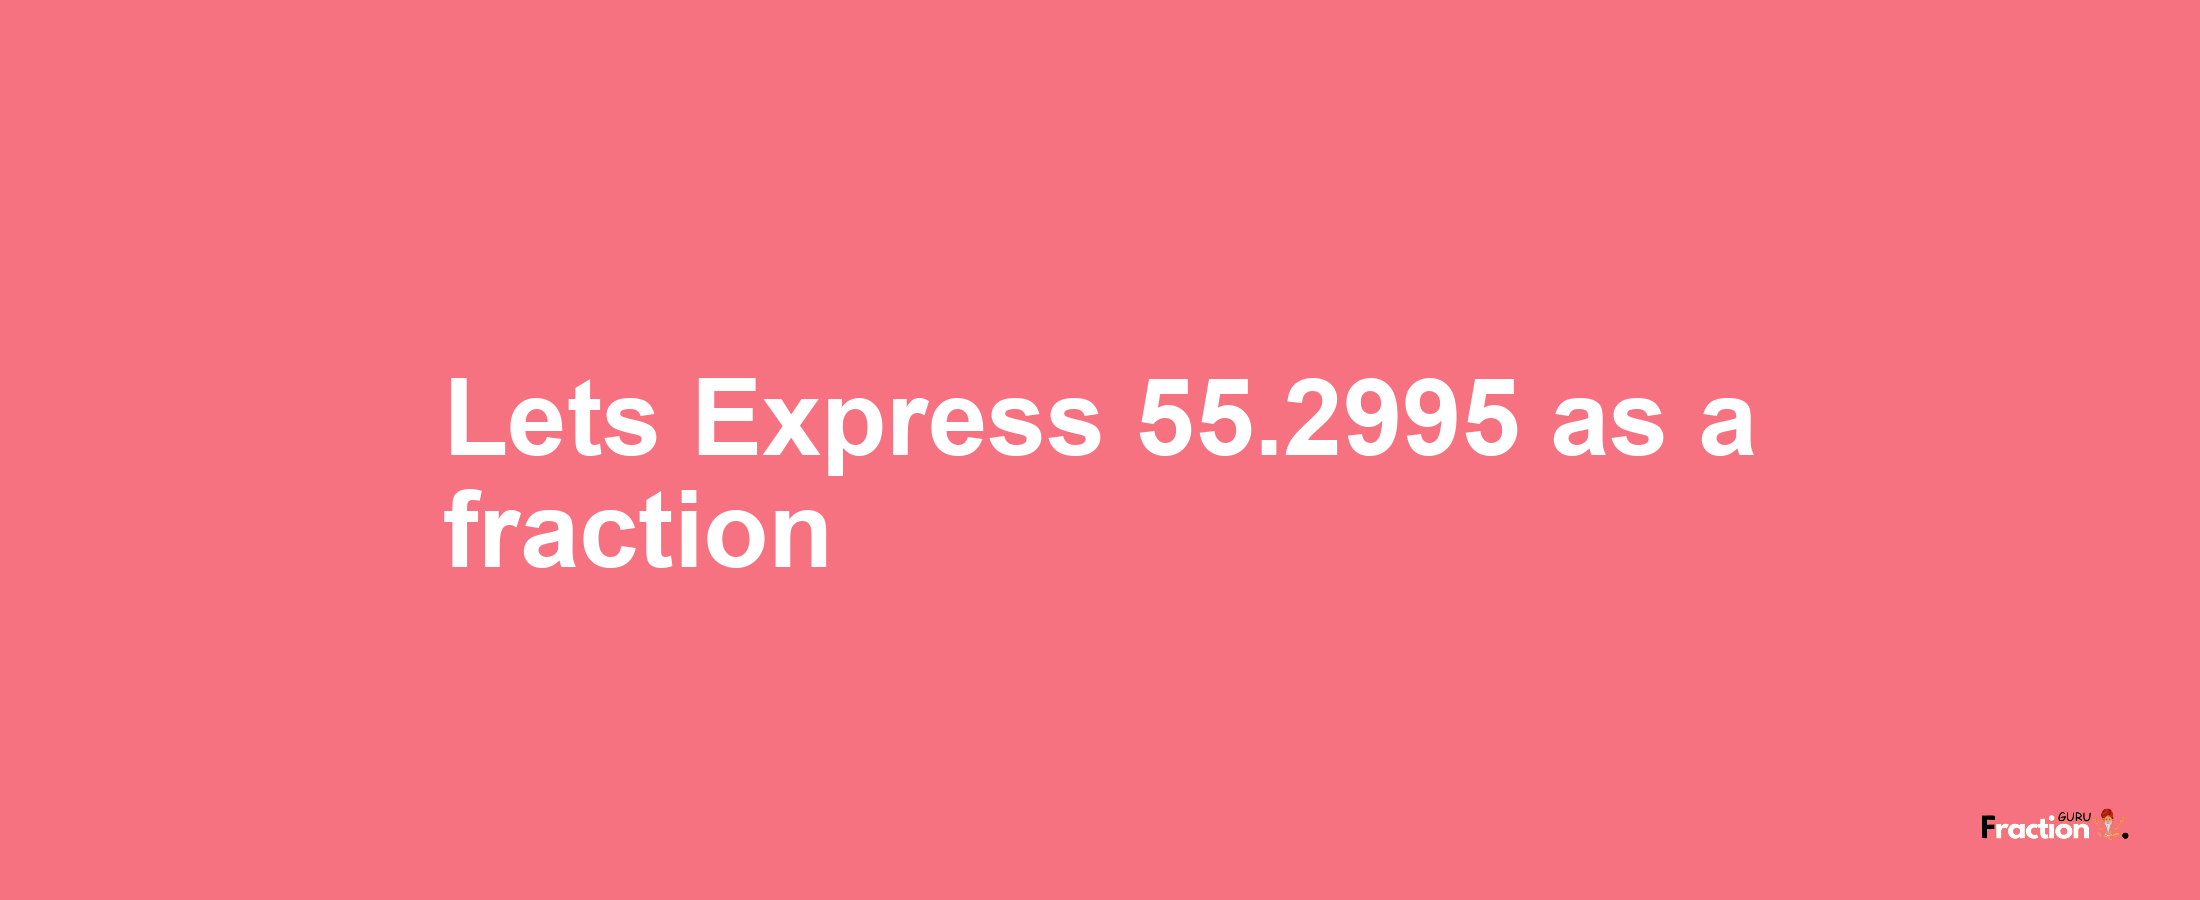 Lets Express 55.2995 as afraction